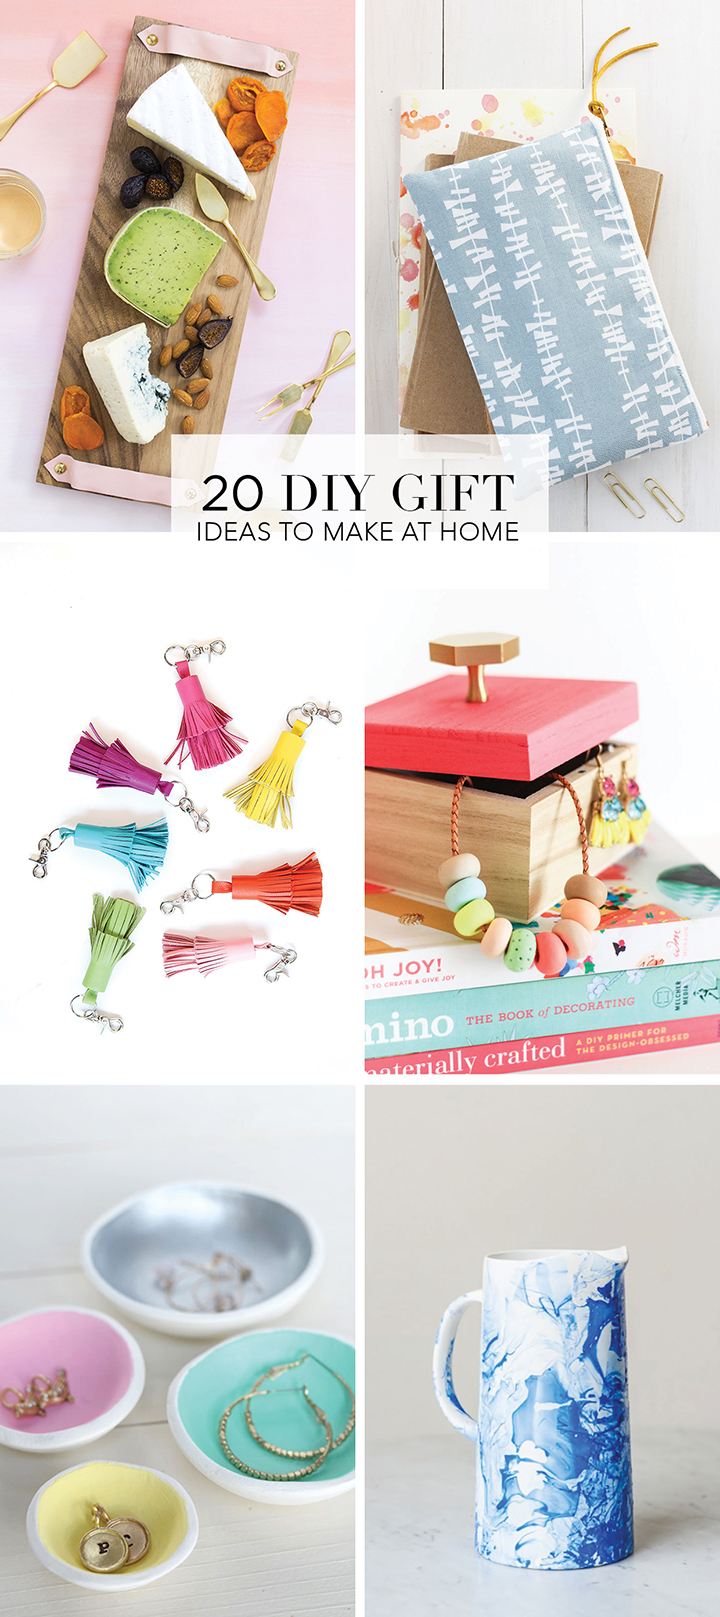 20 Favorite Holiday Gift Ideas to make at home